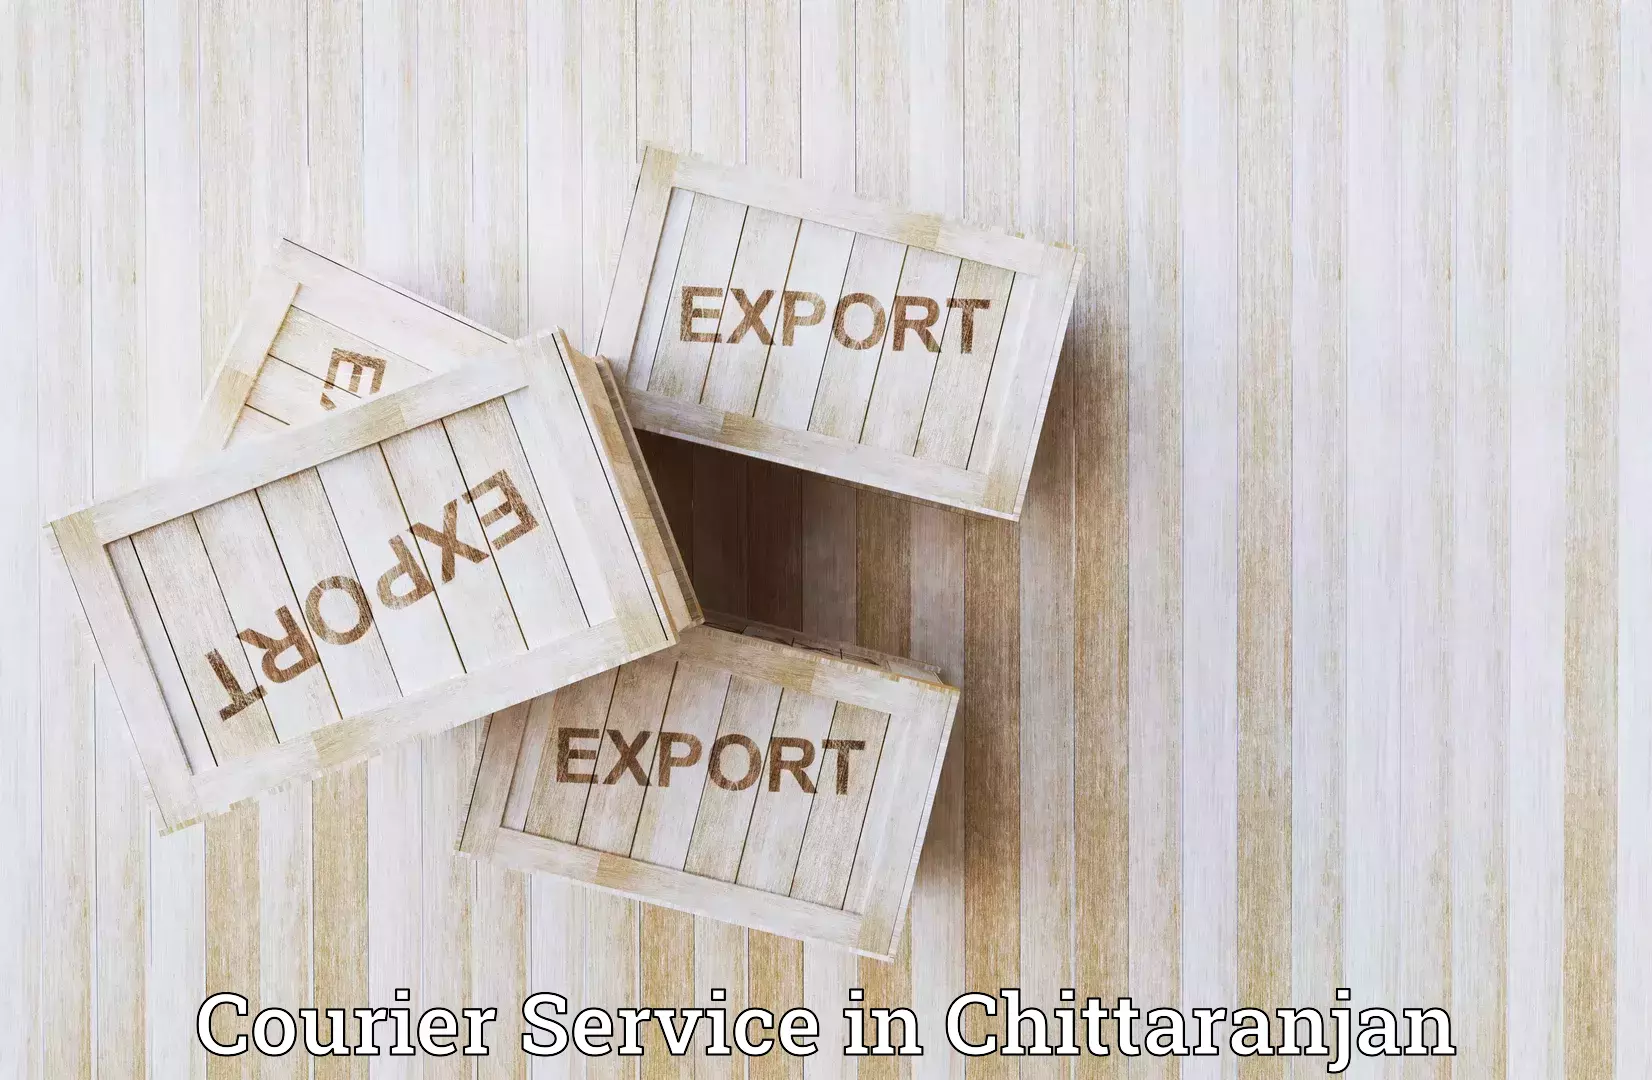 Customer-oriented courier services in Chittaranjan